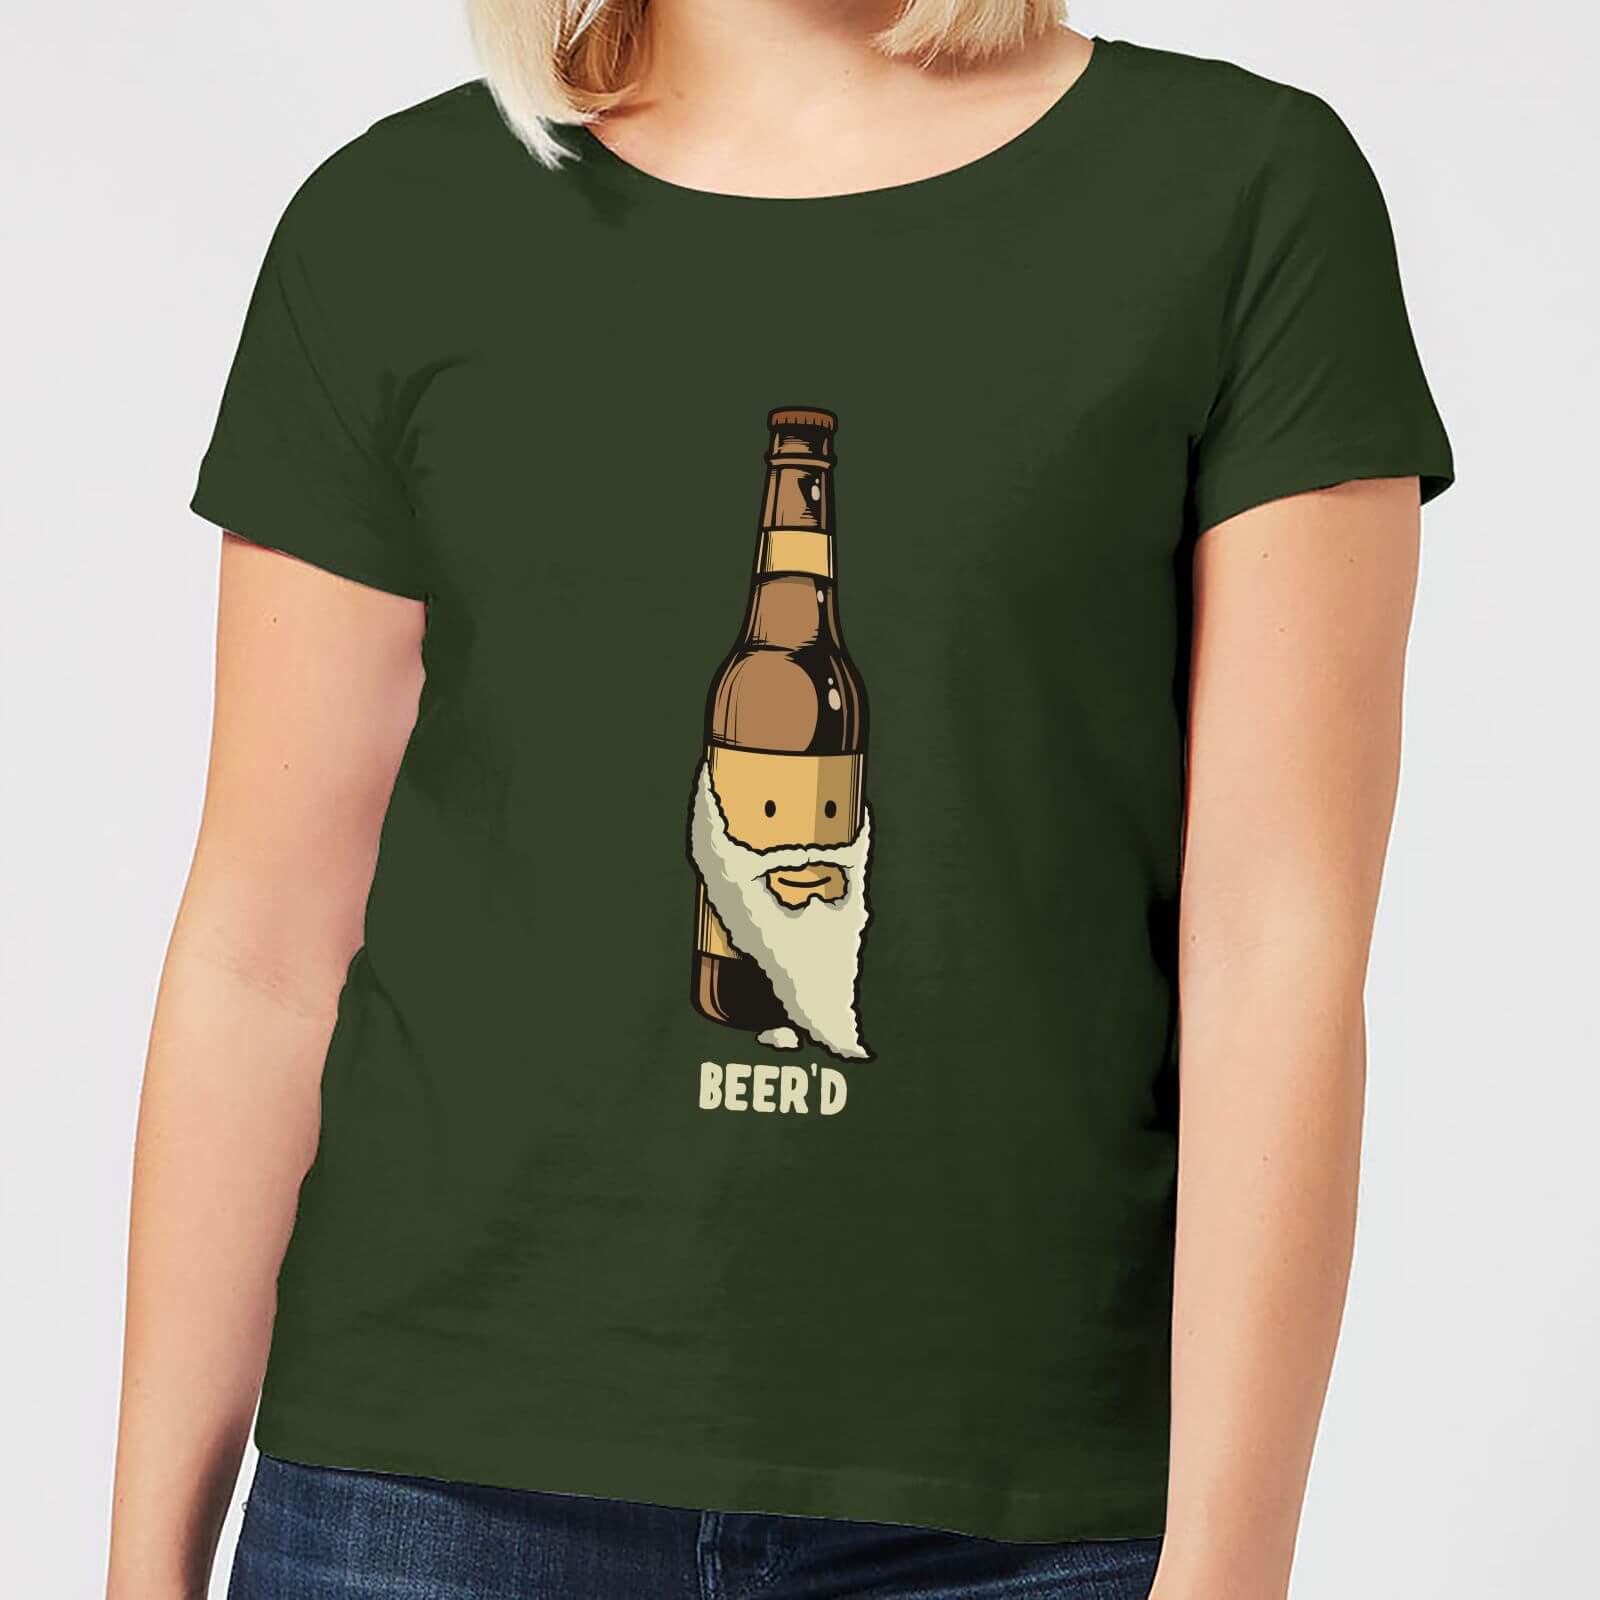 Beershield Beerd Women's T-Shirt - Forest Green - L - Forest Green